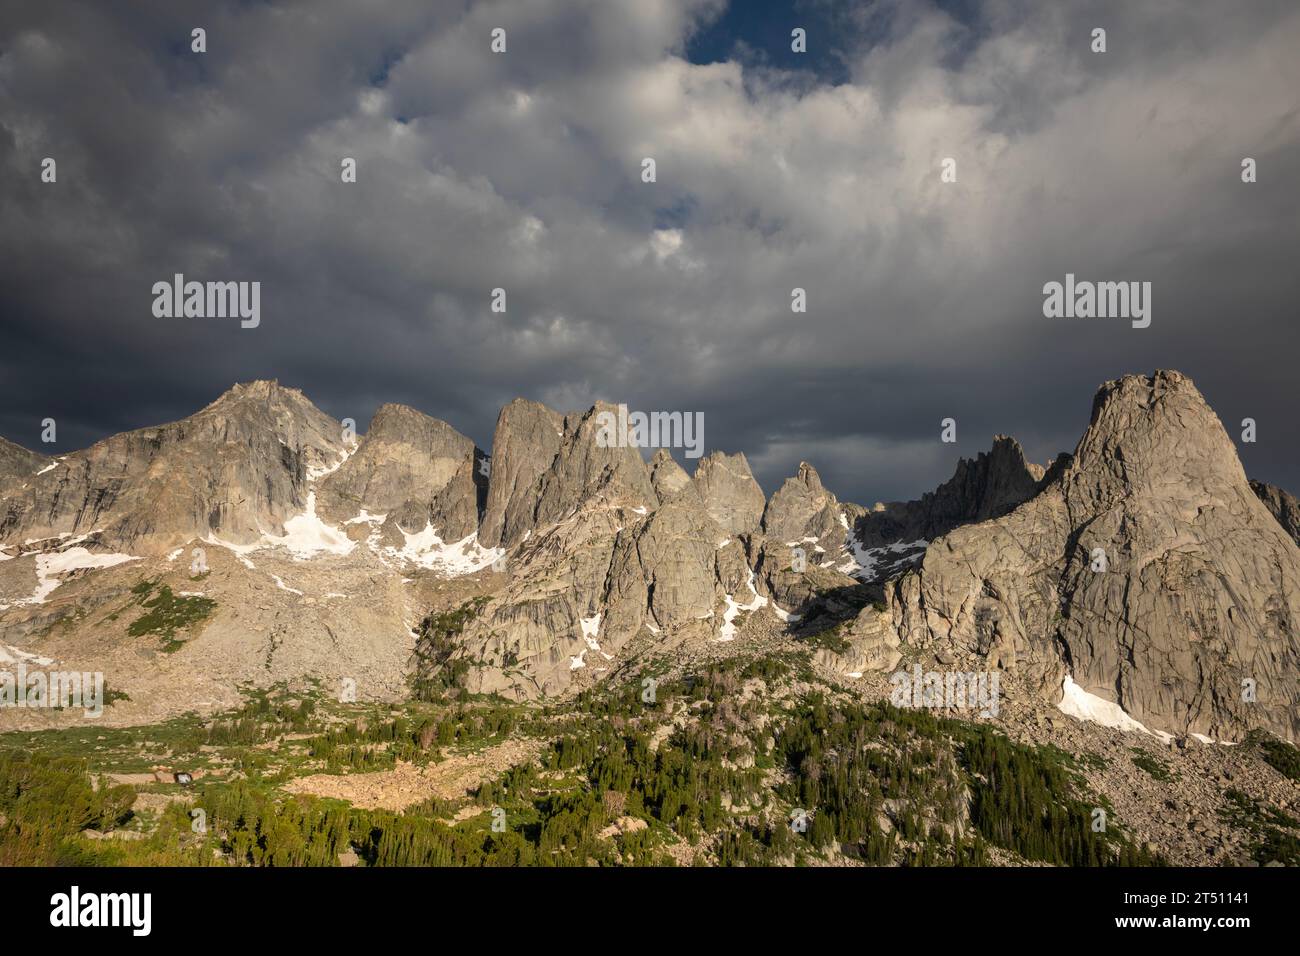 WY05589-00...WYOMING - Dark clouds gathering over the Cirque of the Towers in the Popo Agie Wilderness area. Stock Photo